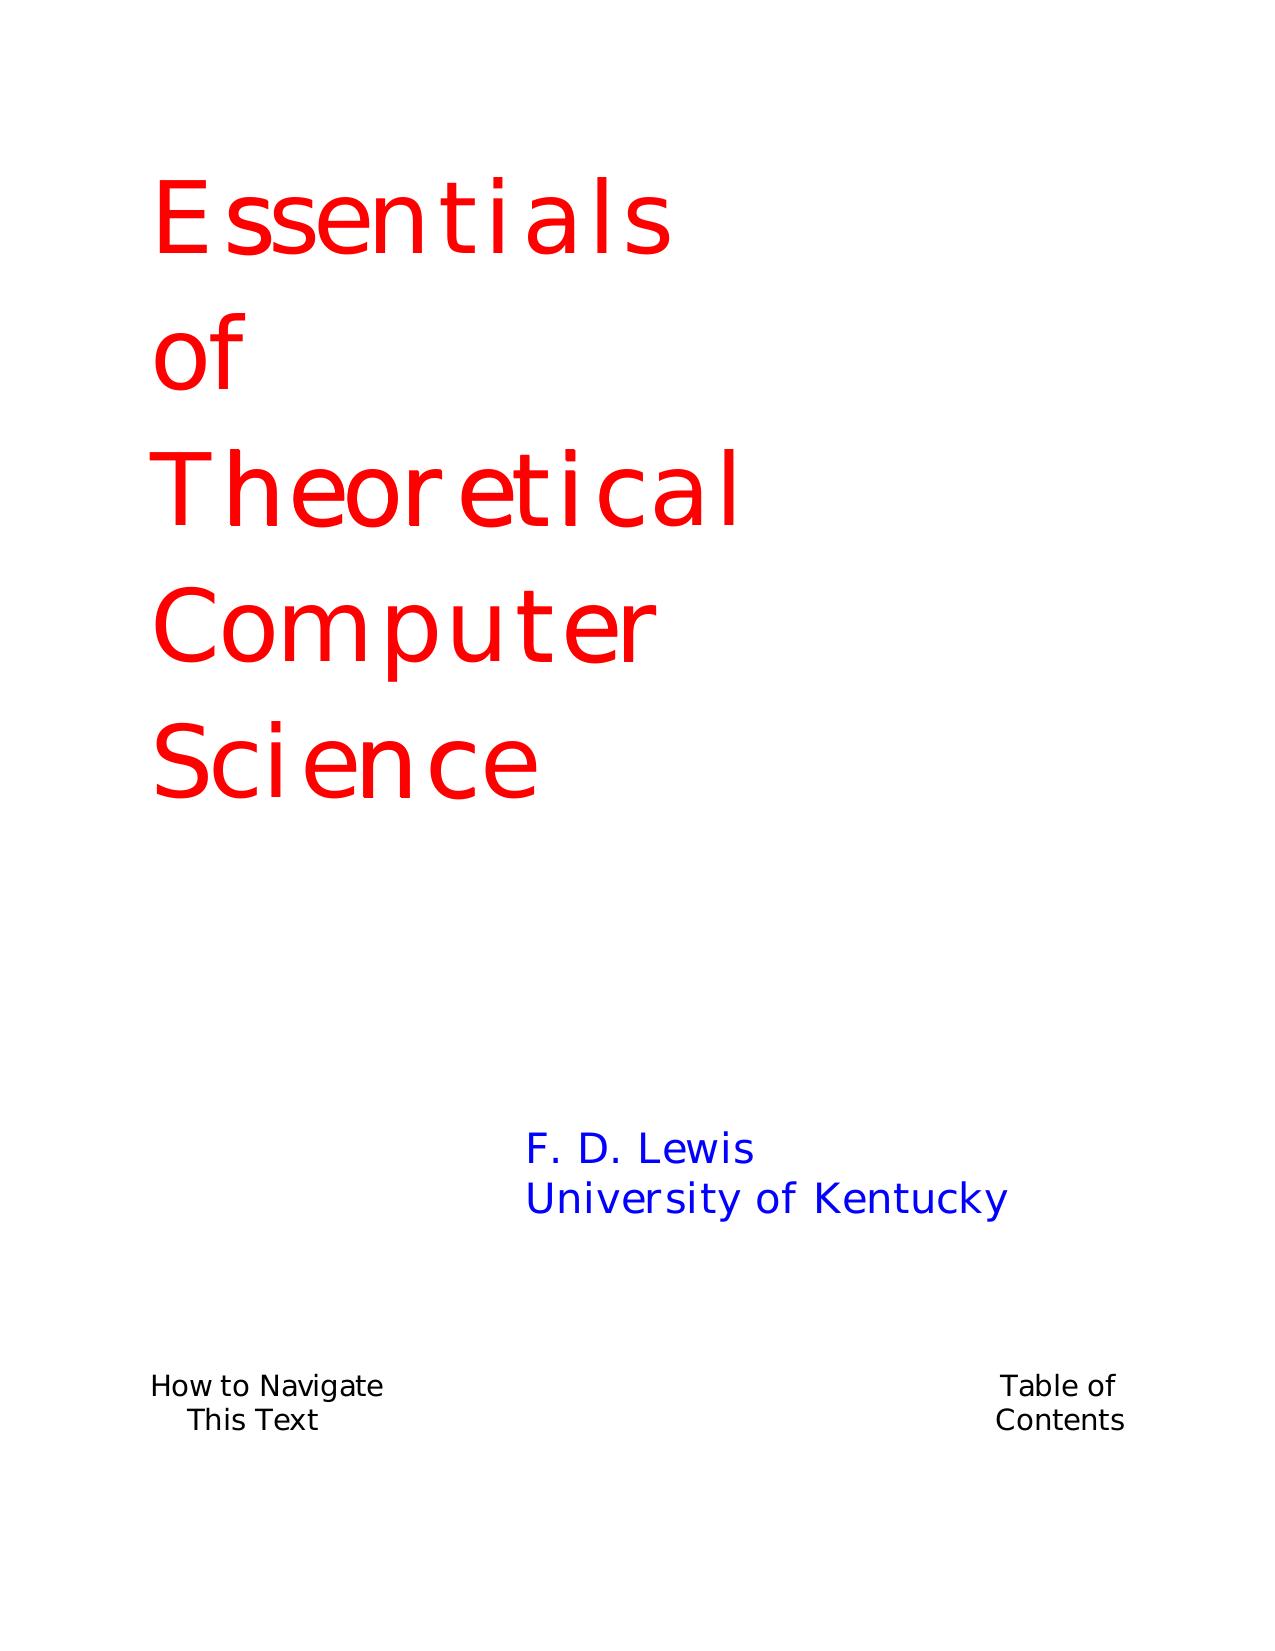 Essentials of Theoretical Computer Science